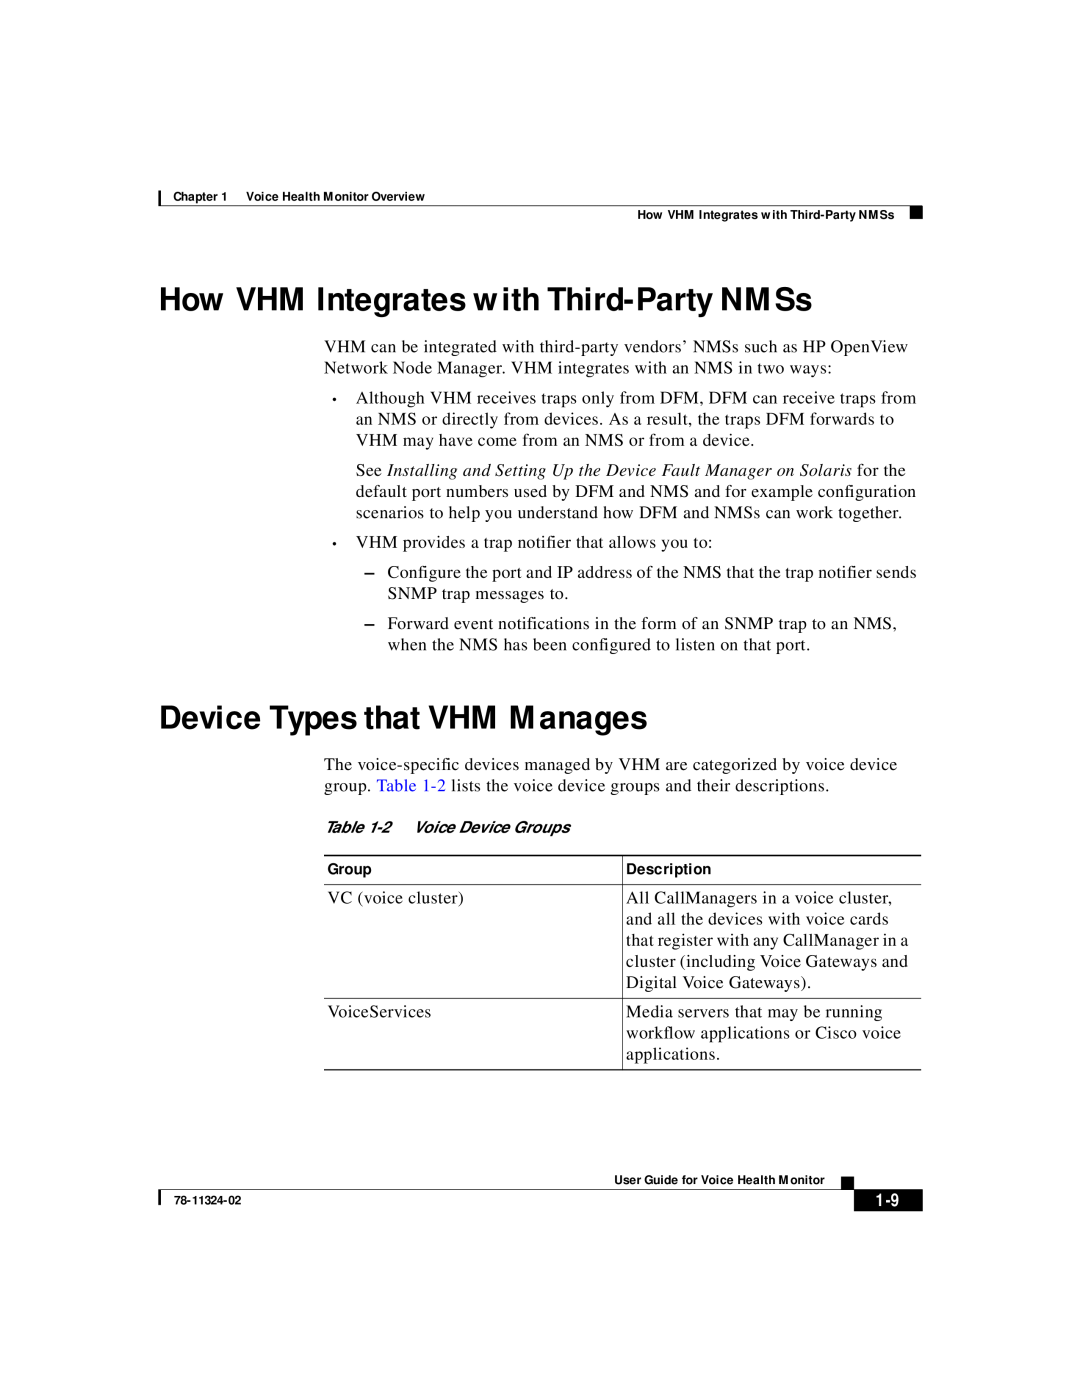 Cisco Systems 78-11324-02 How VHM Integrates with Third-Party NMSs, Device Types that VHM Manages, Group, Description 